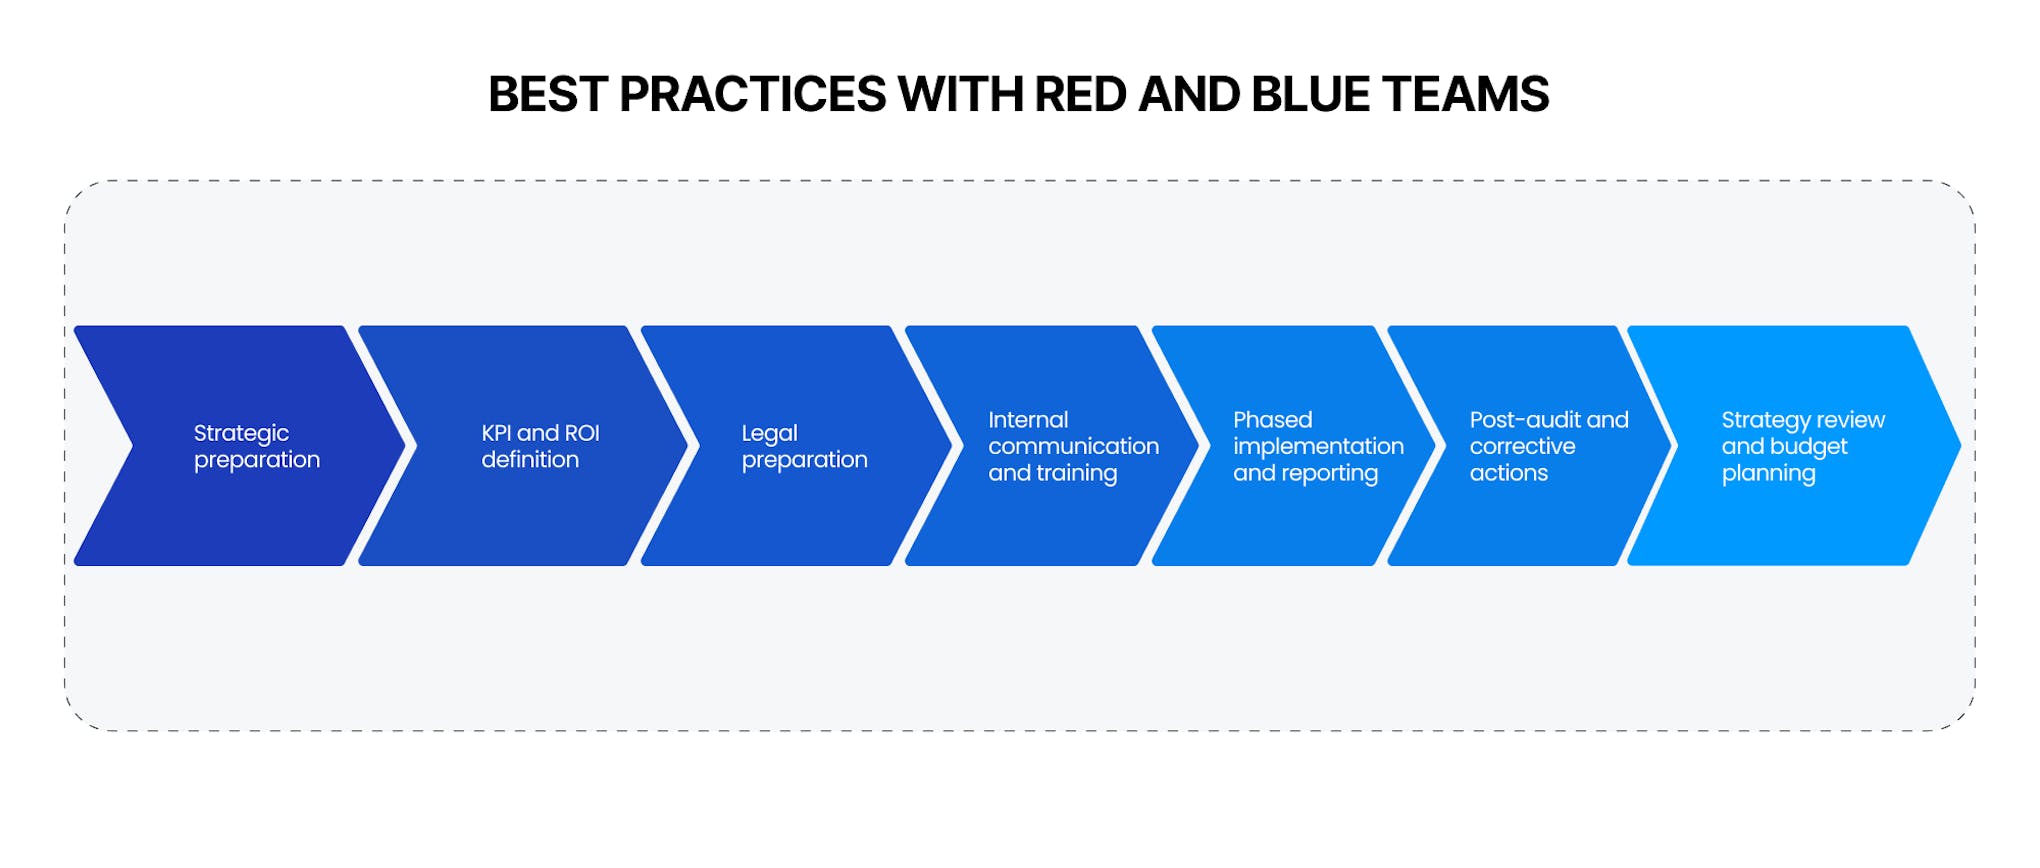 Best practices for working with red and blue teams